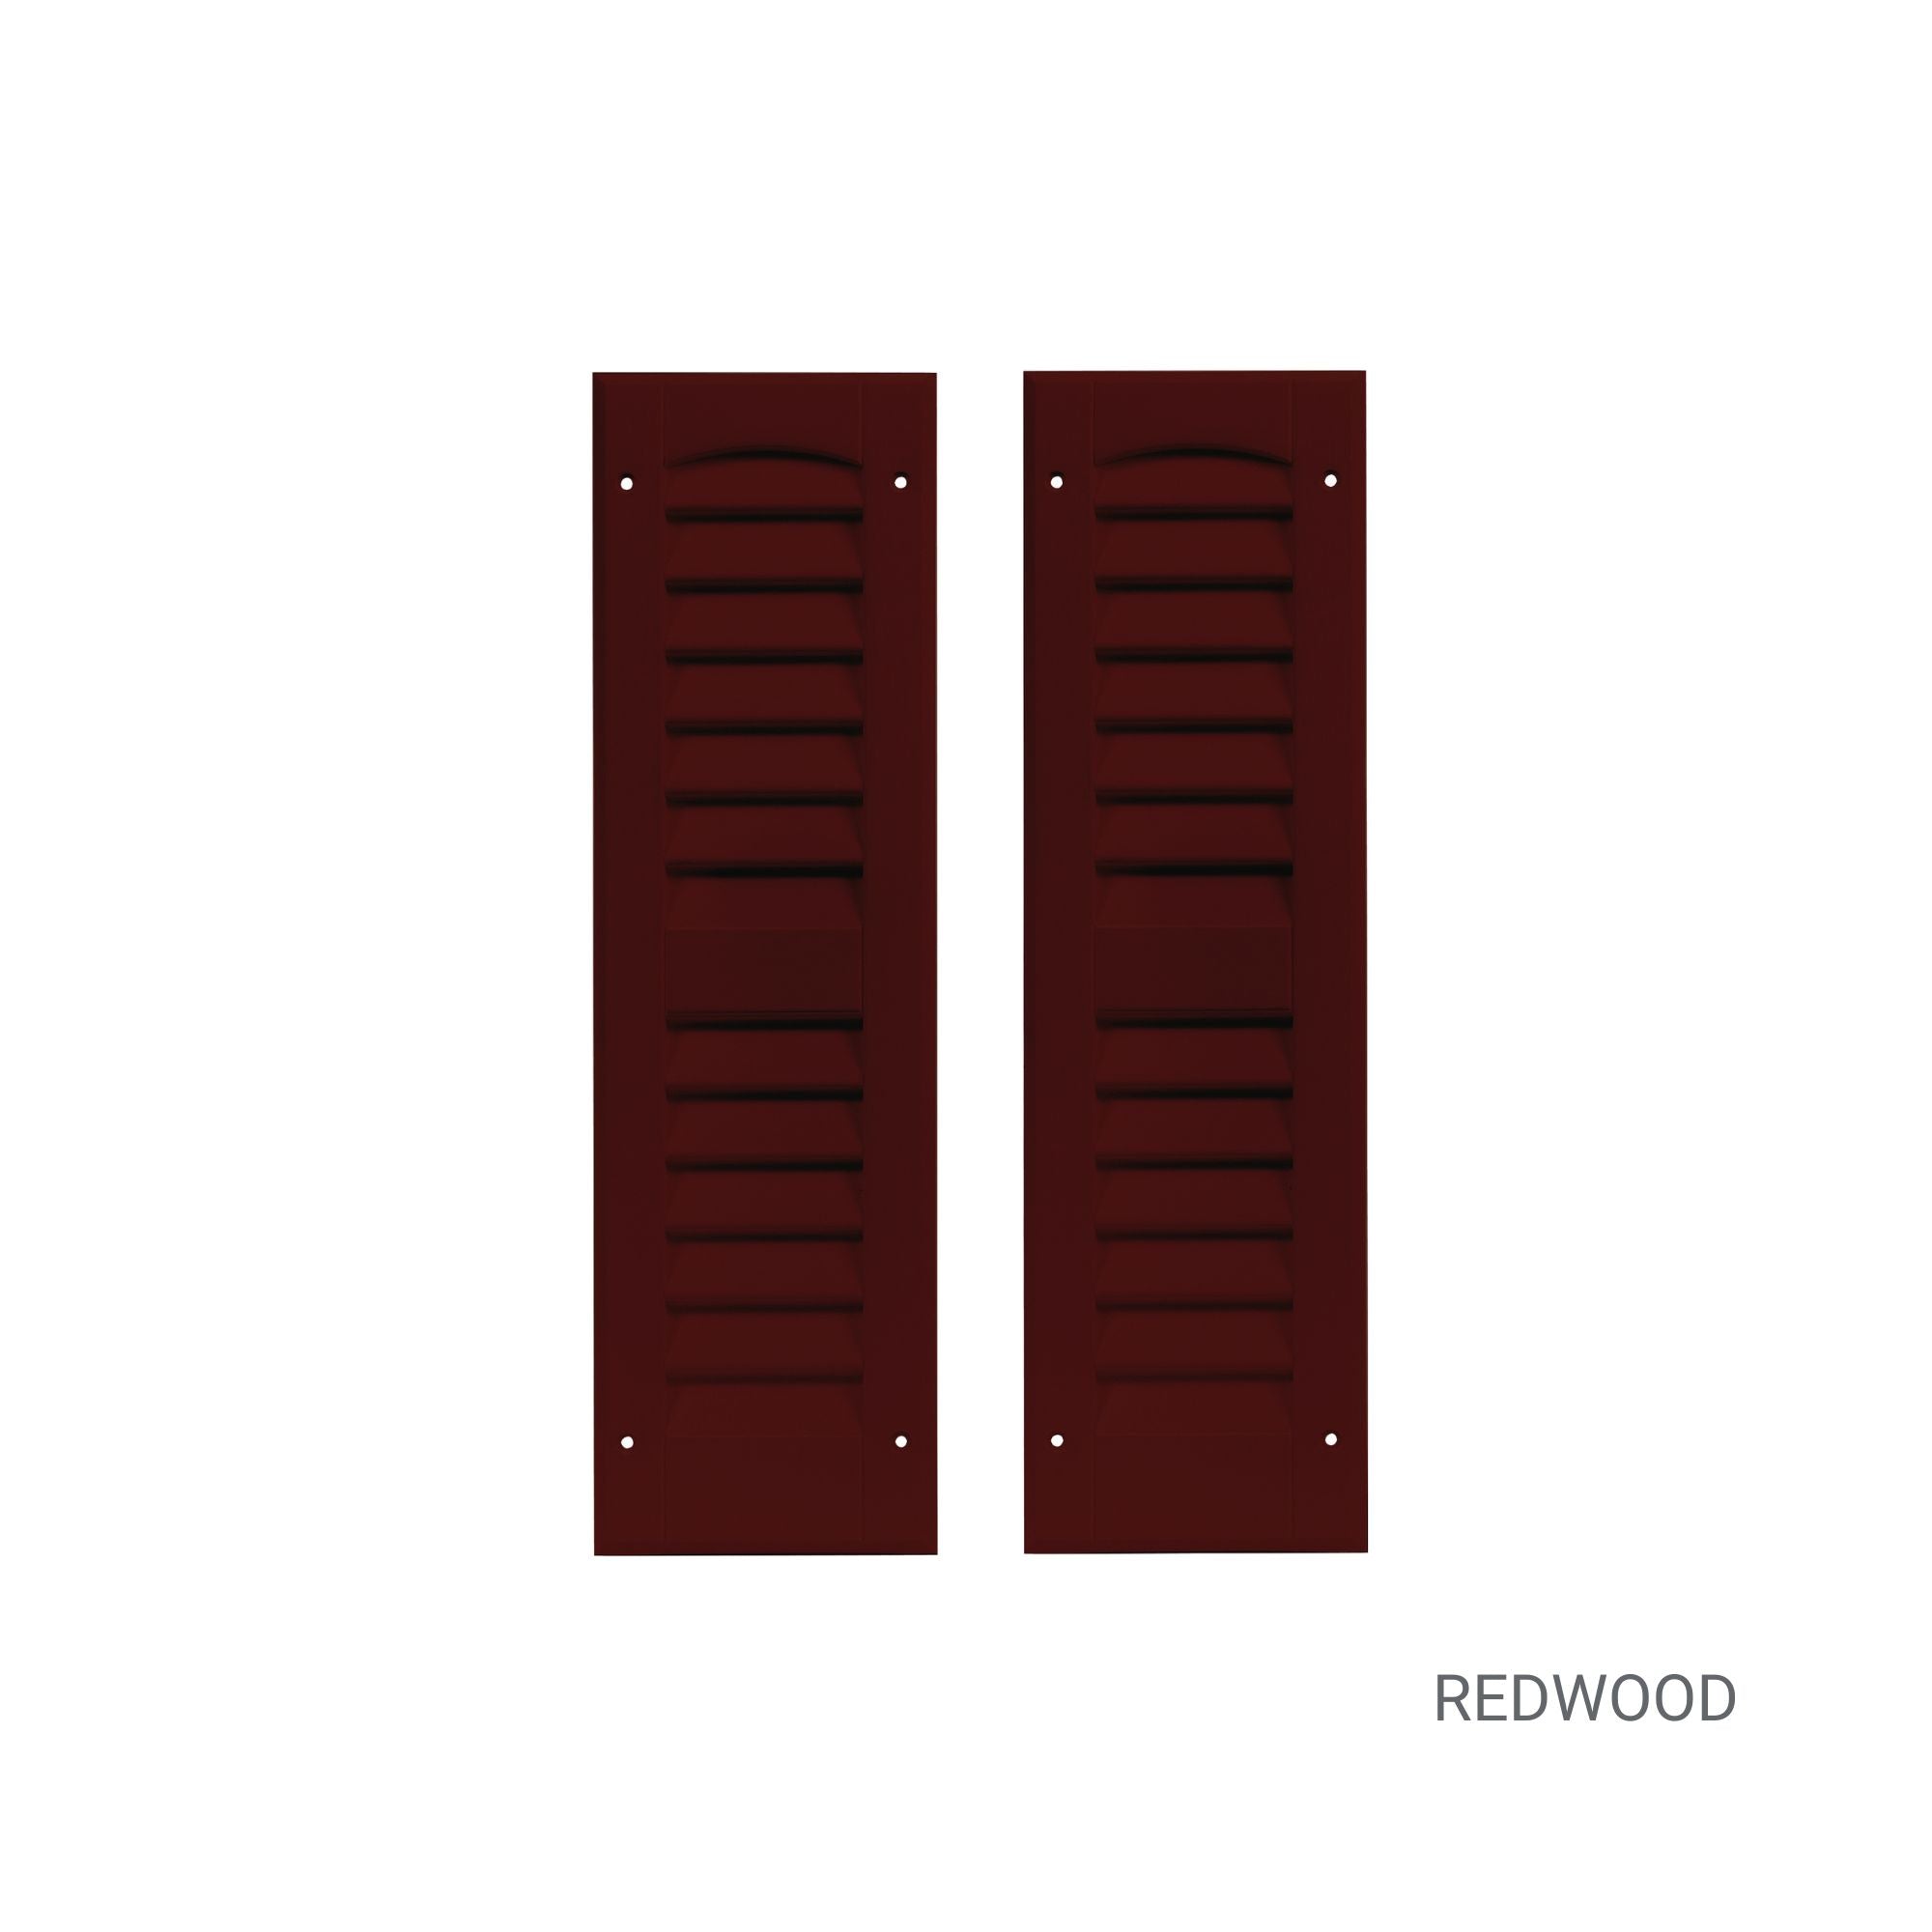 Pair of 6" W x 21" H Louvered Redwood Shutters for Sheds, Playhouses, and MORE